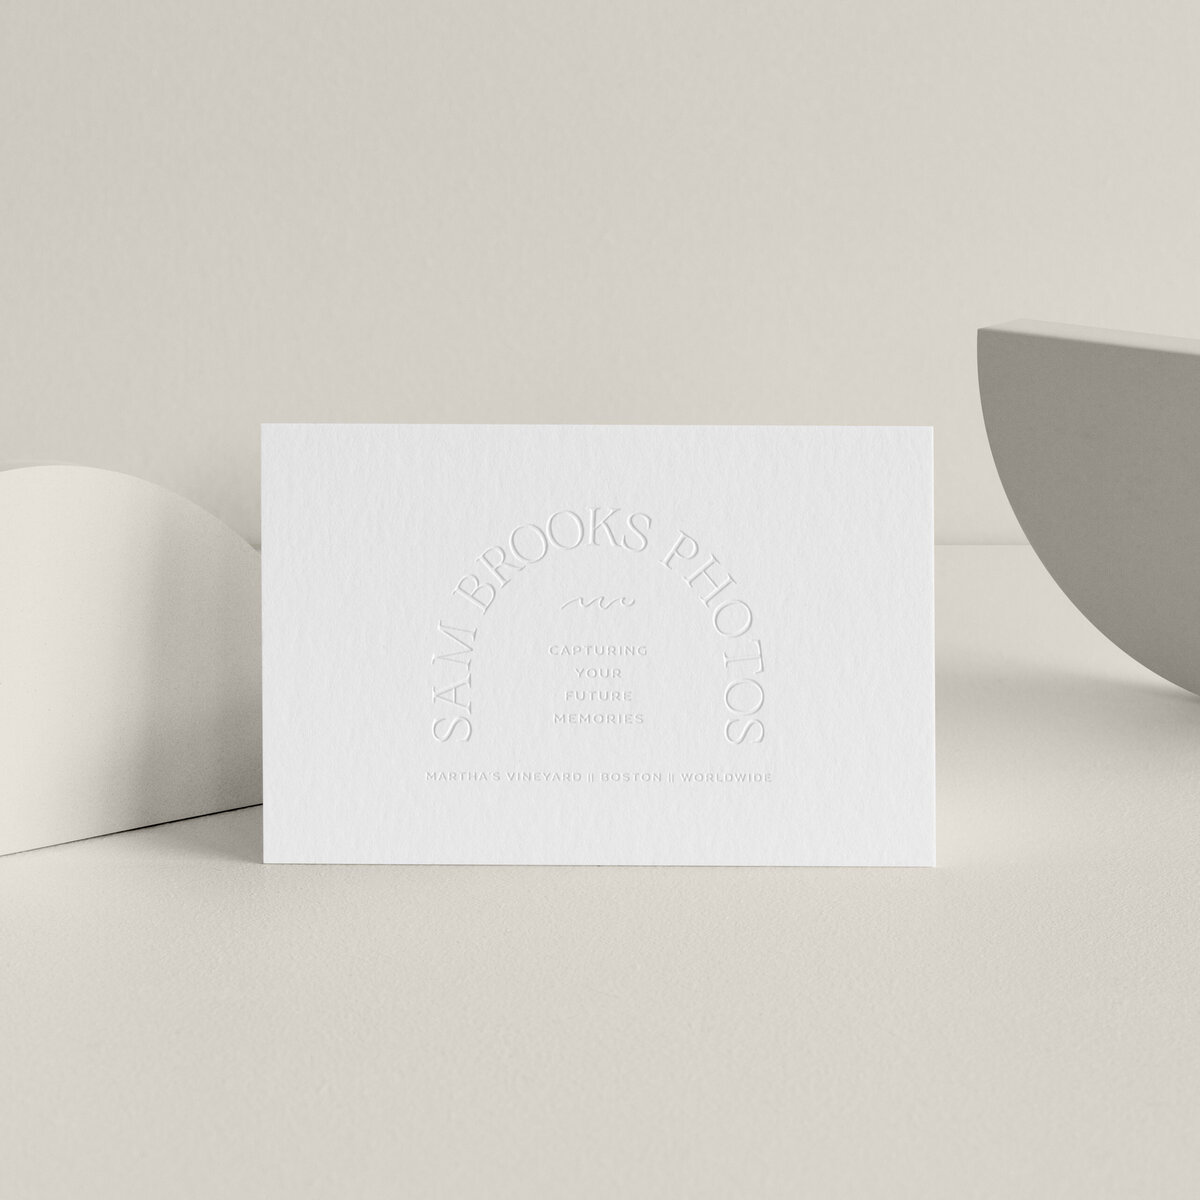 a mockup showing an arch logo design on stationery